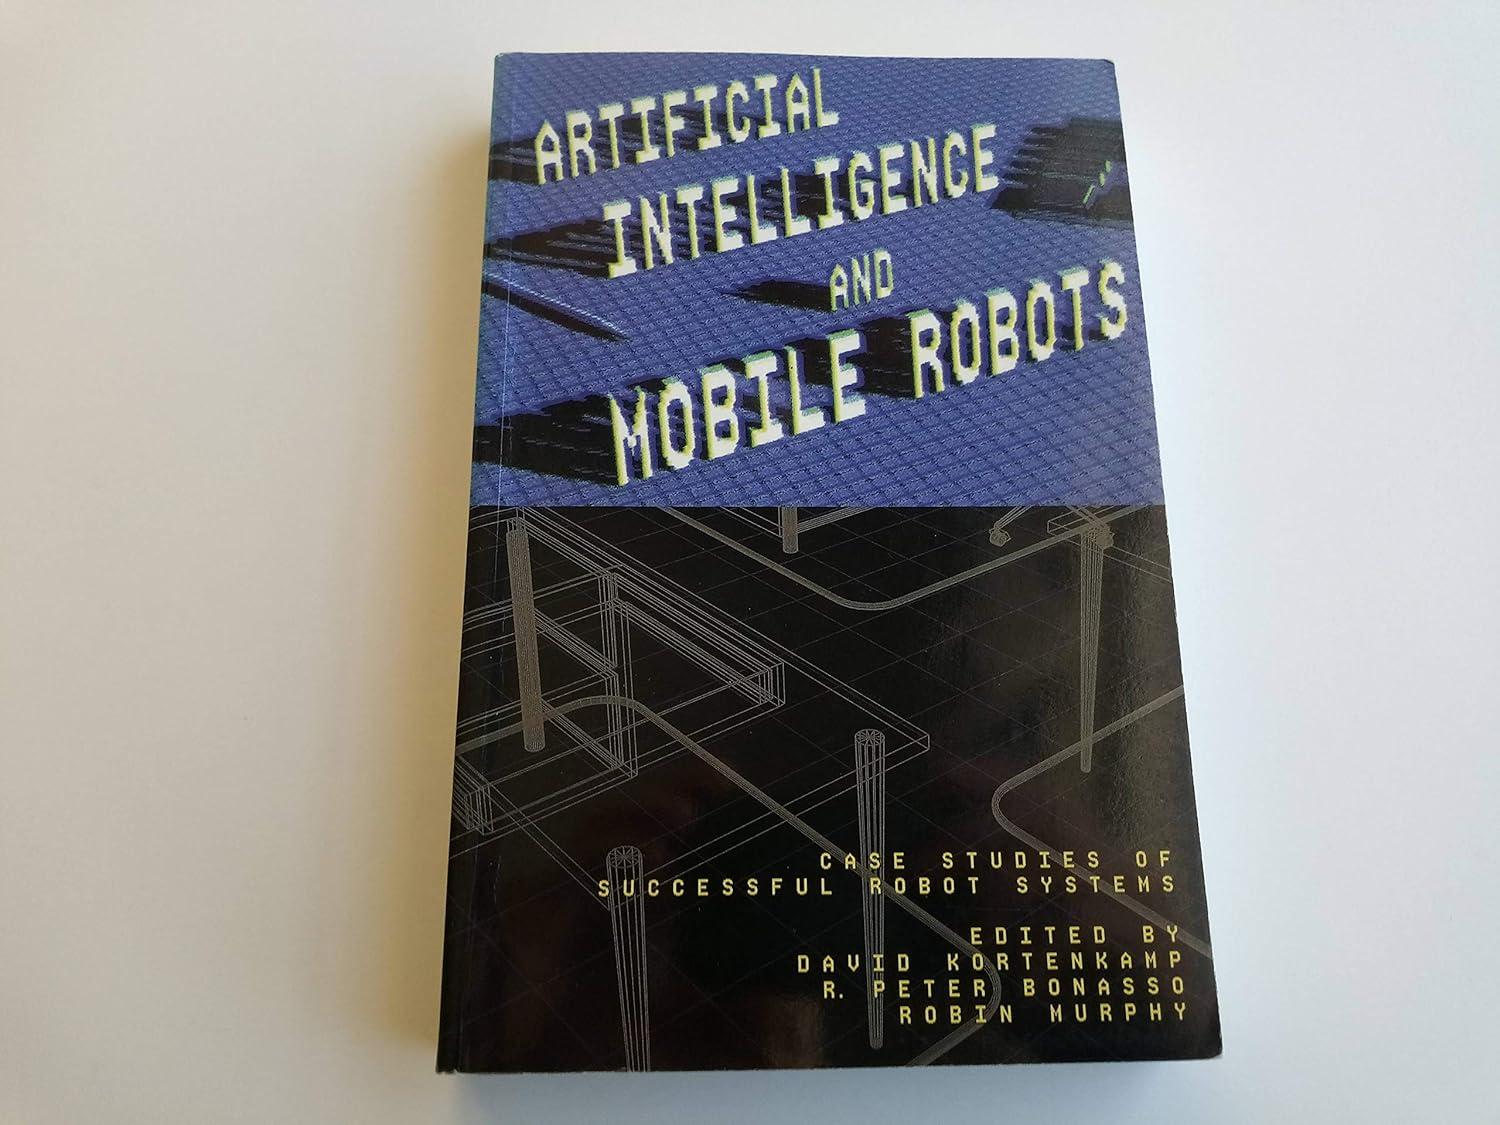 Artificial Intelligence And Mobile Robots Case Studies Of Successful Robot Systems